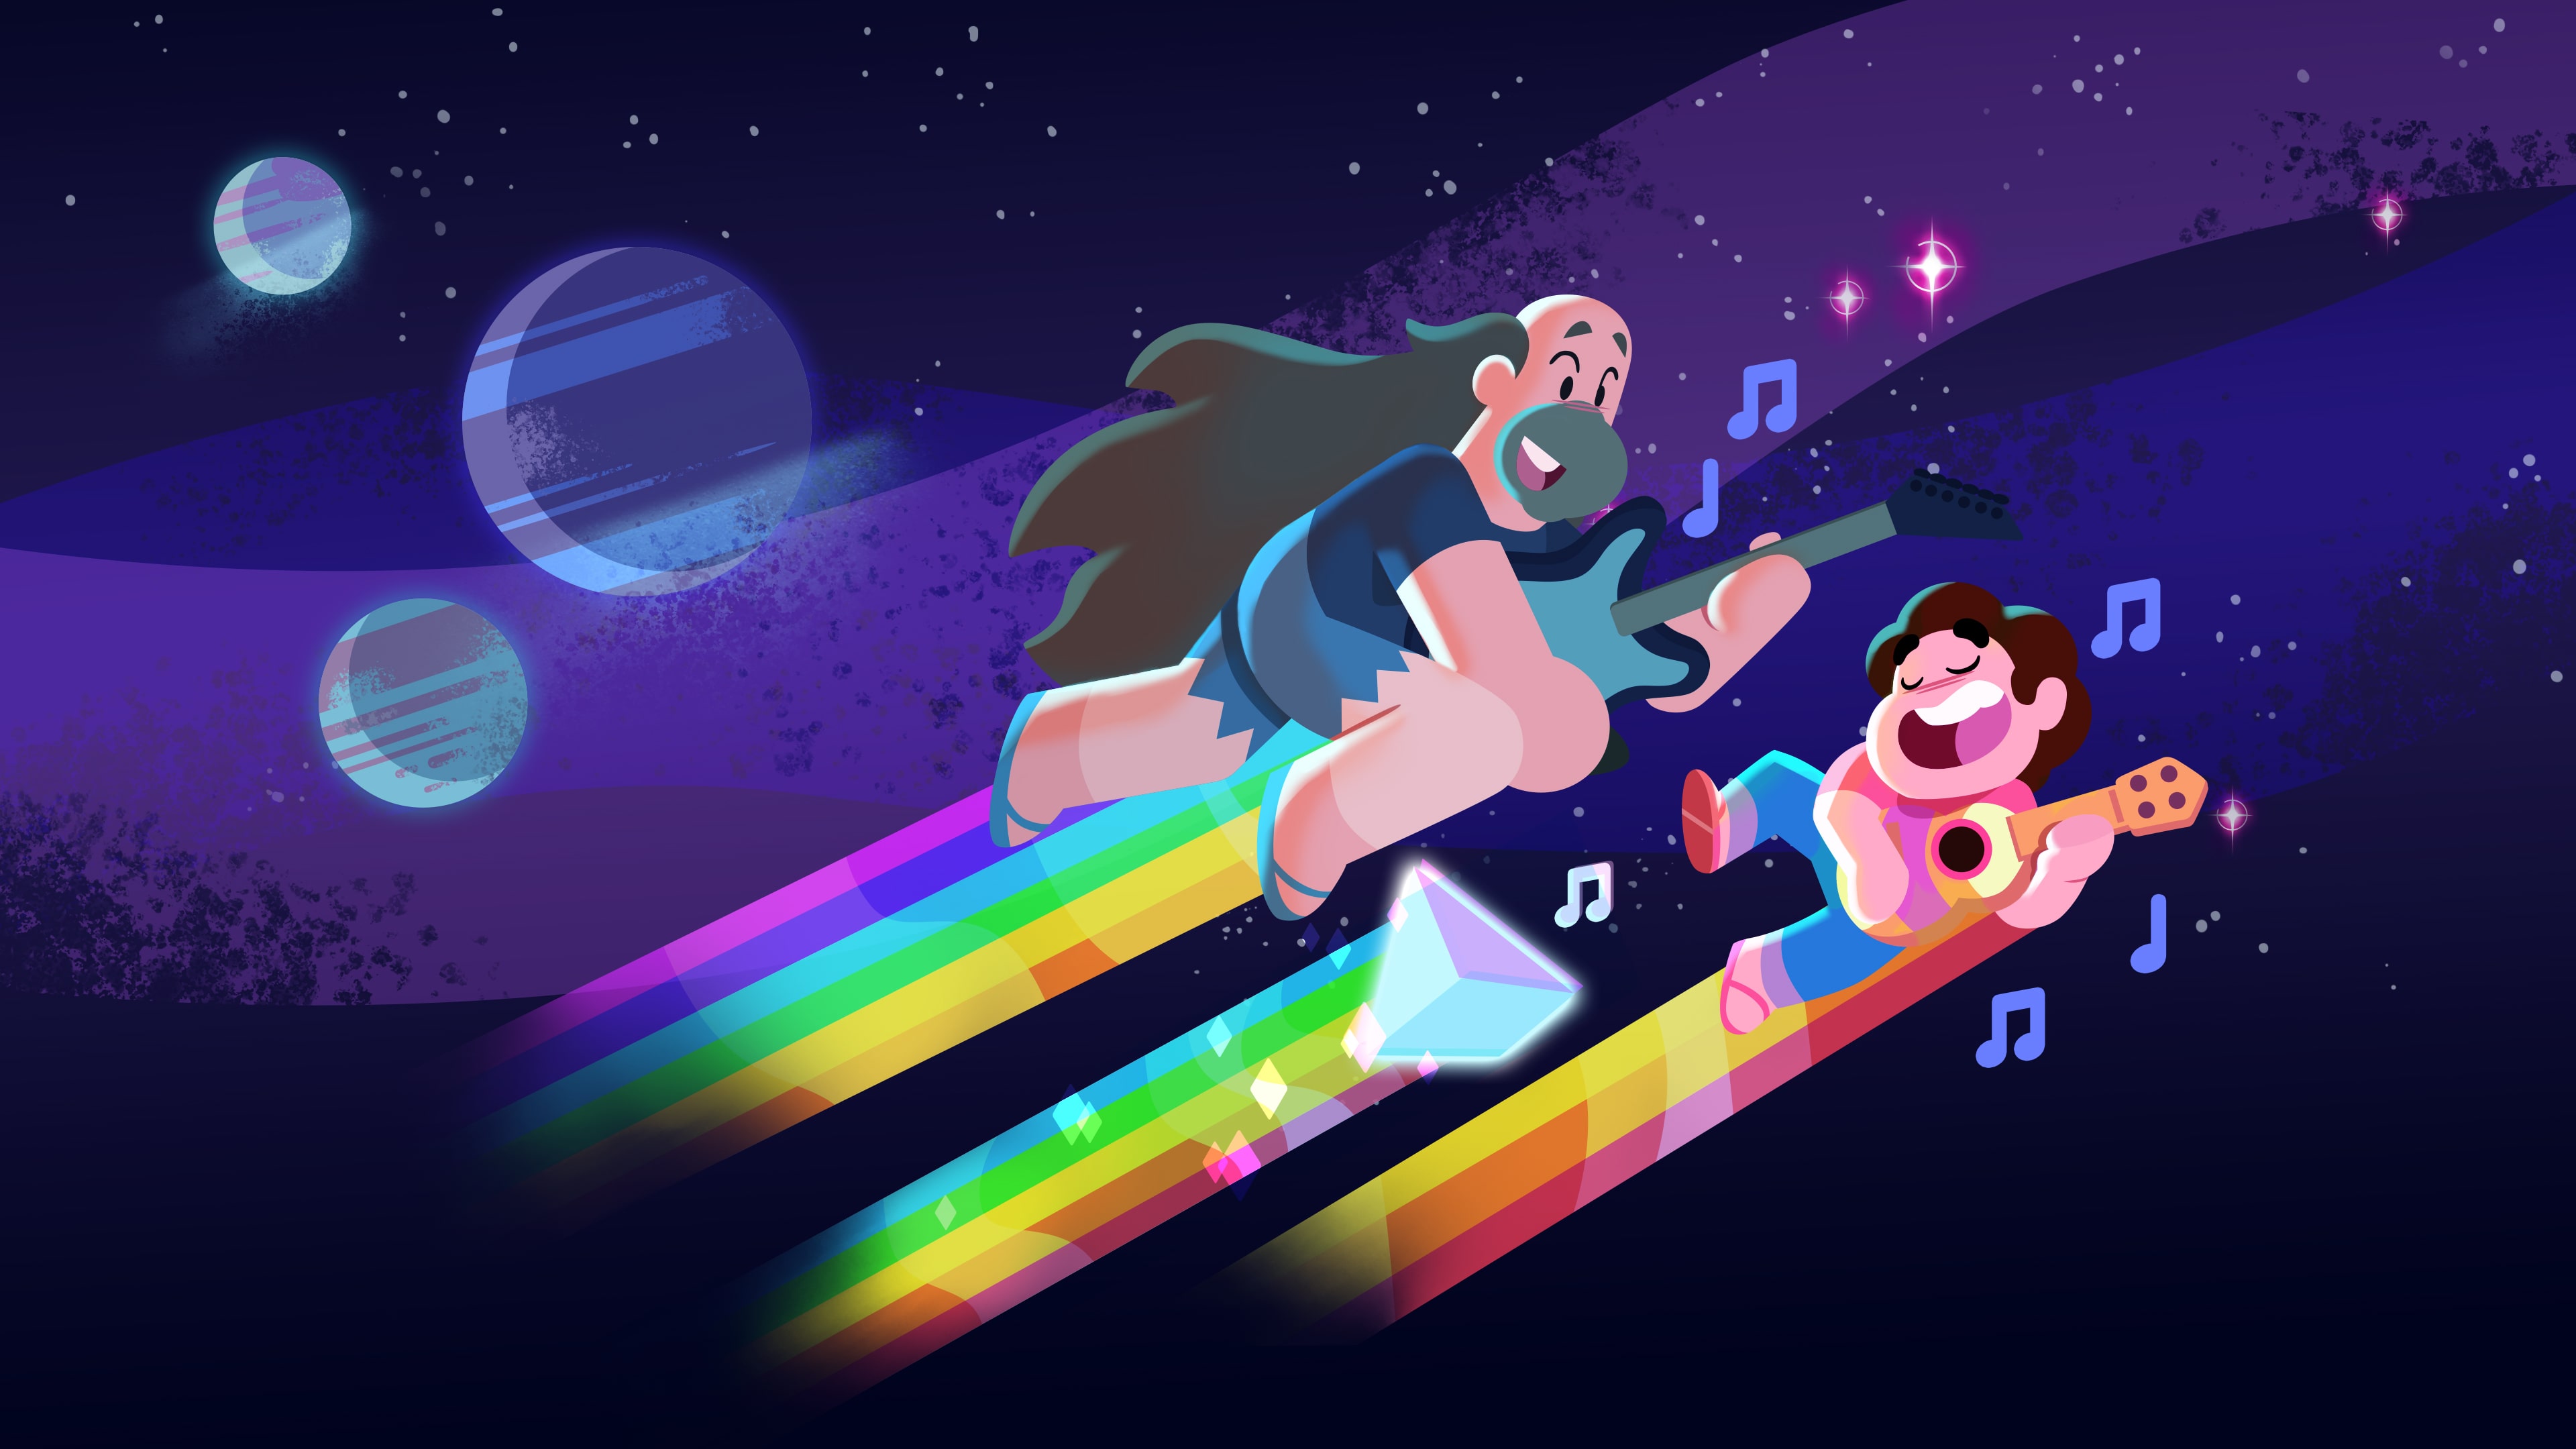 Steven Universe  Watch free videos and play Steven Universe Games